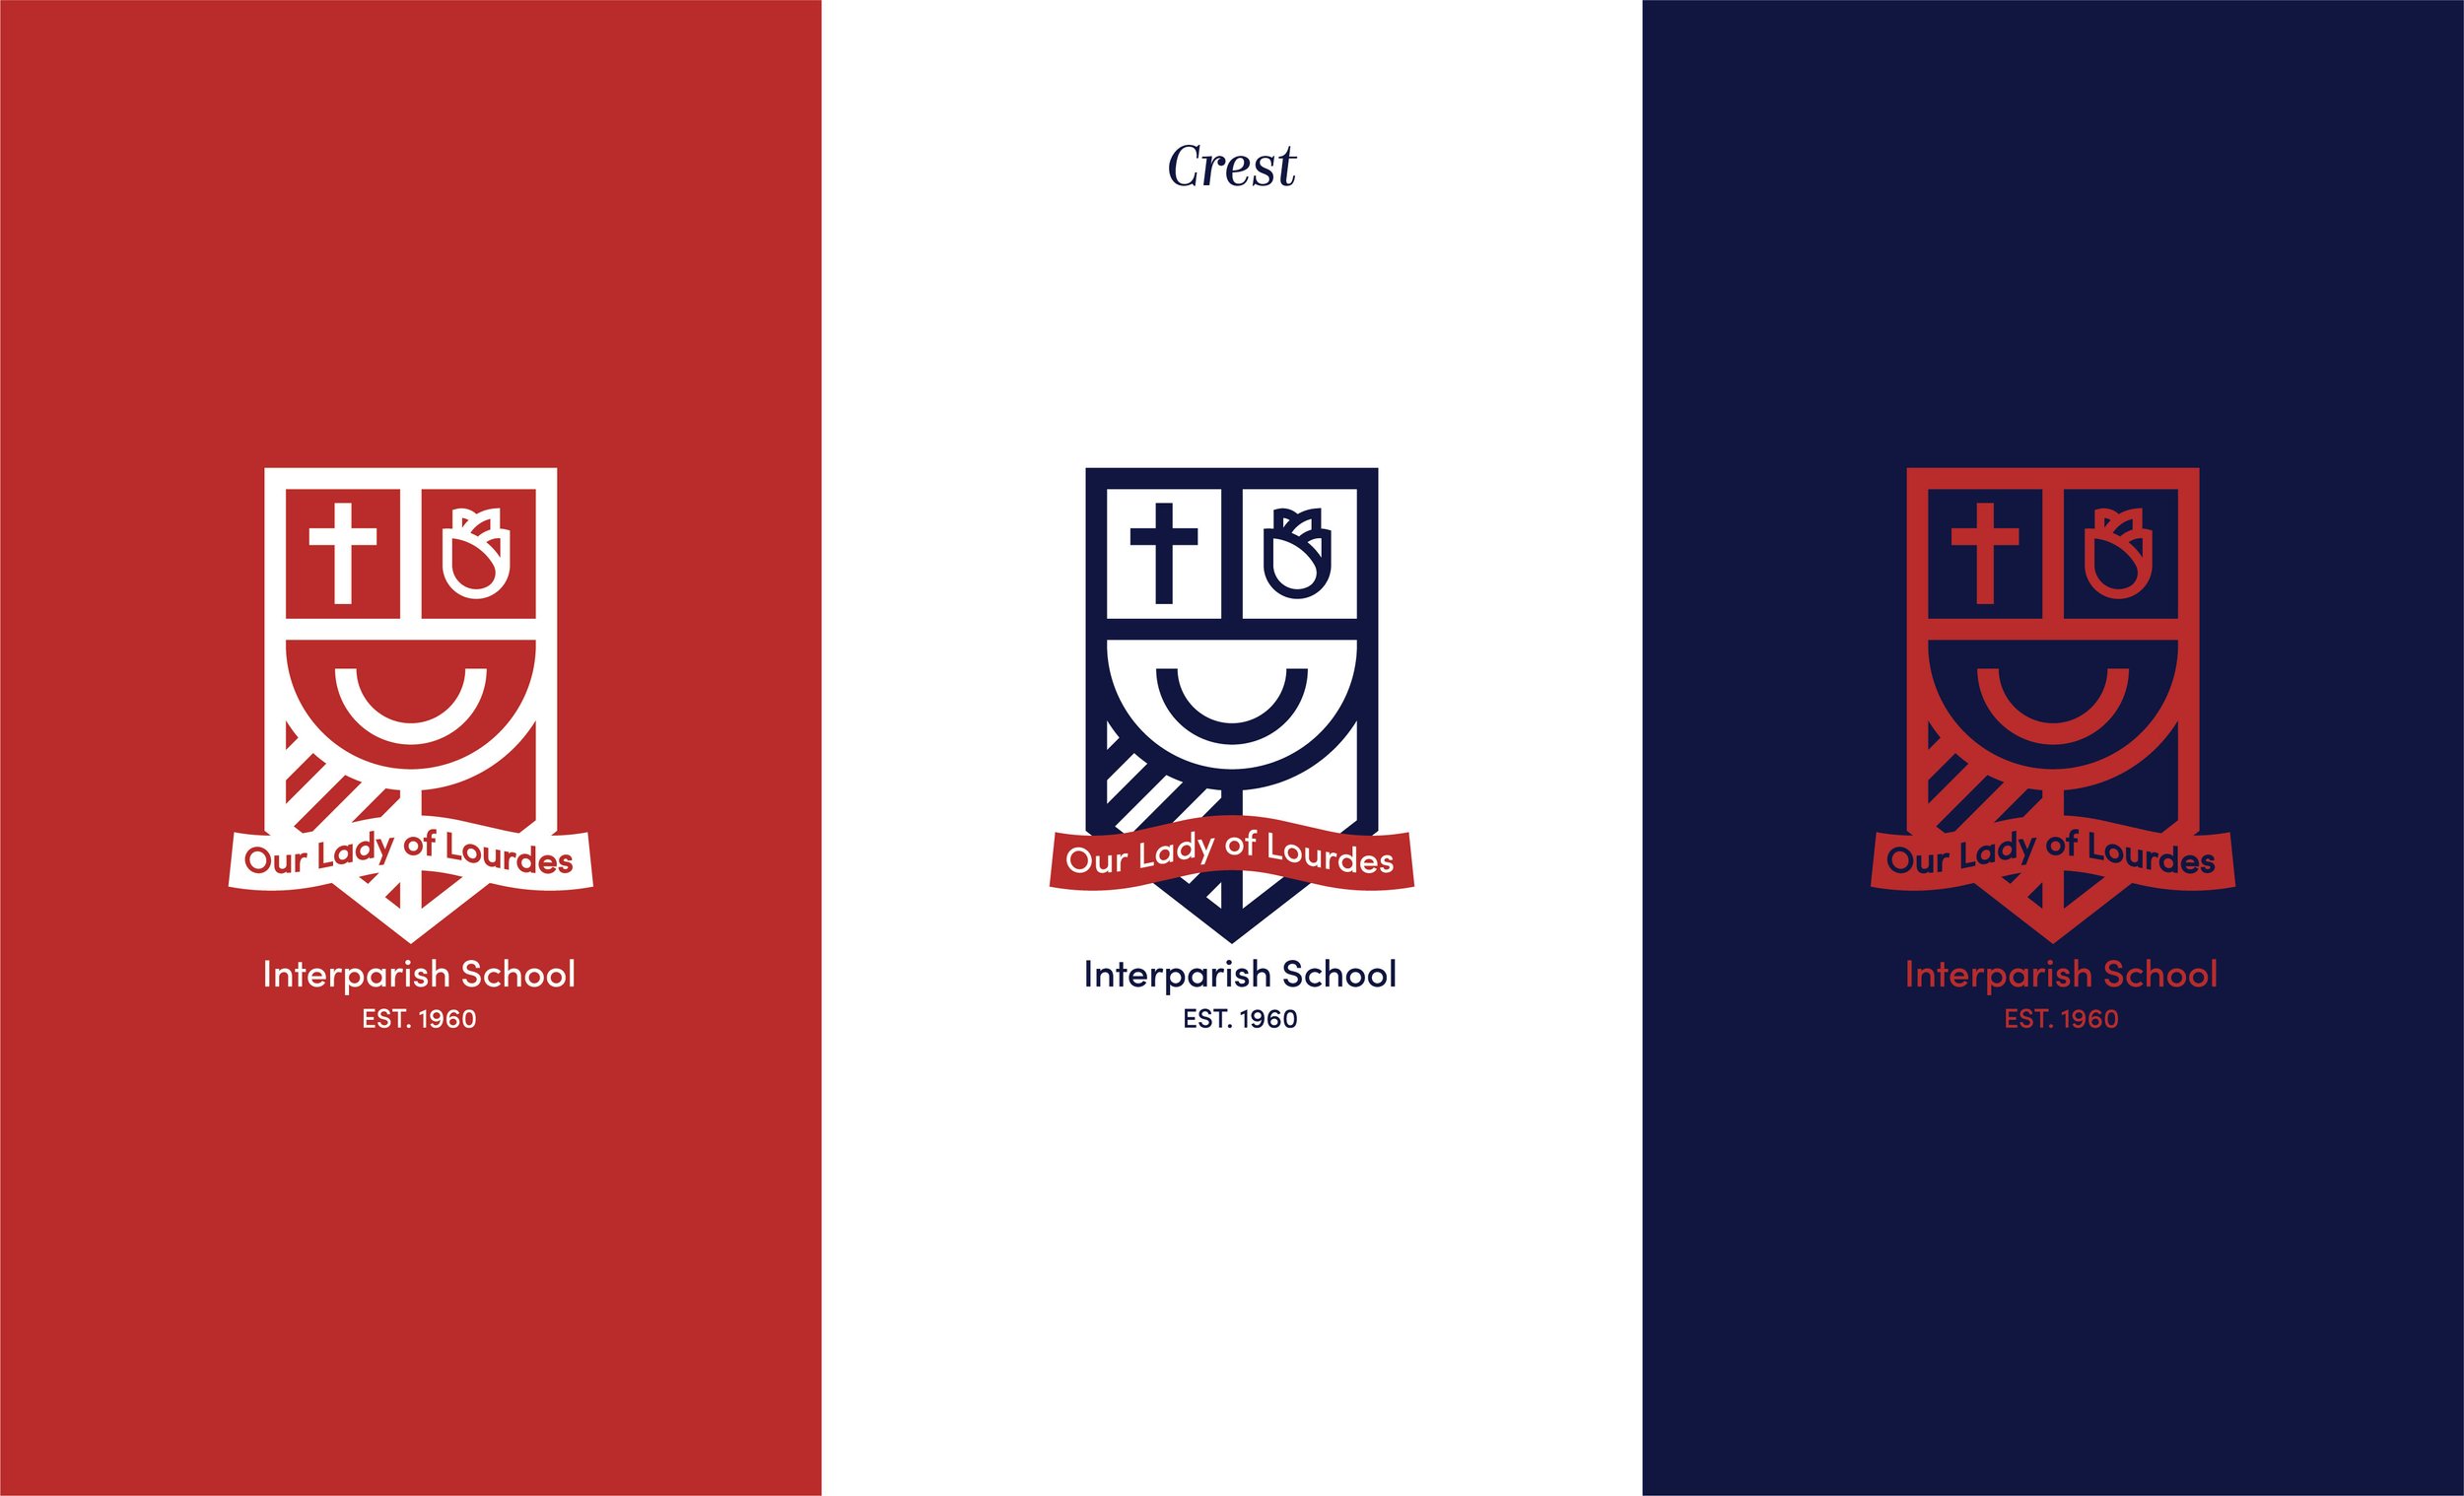  Catholic school crest rebrand in three different color combinations of red, navy, and white. 